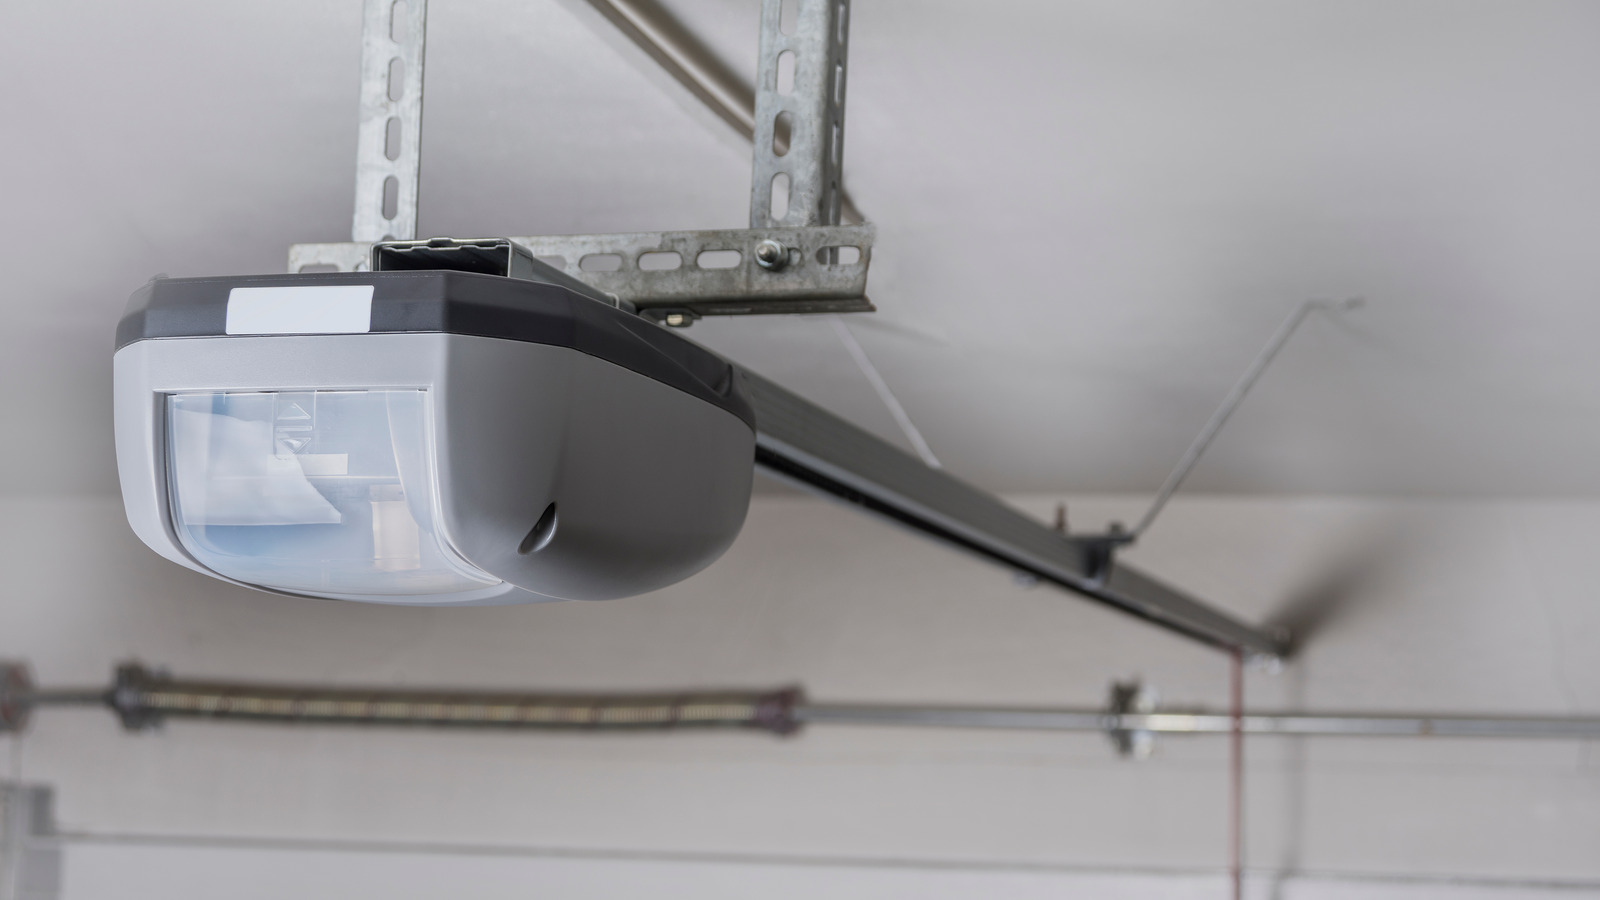 How Much Does It Cost To Install A Garage Door Opener?